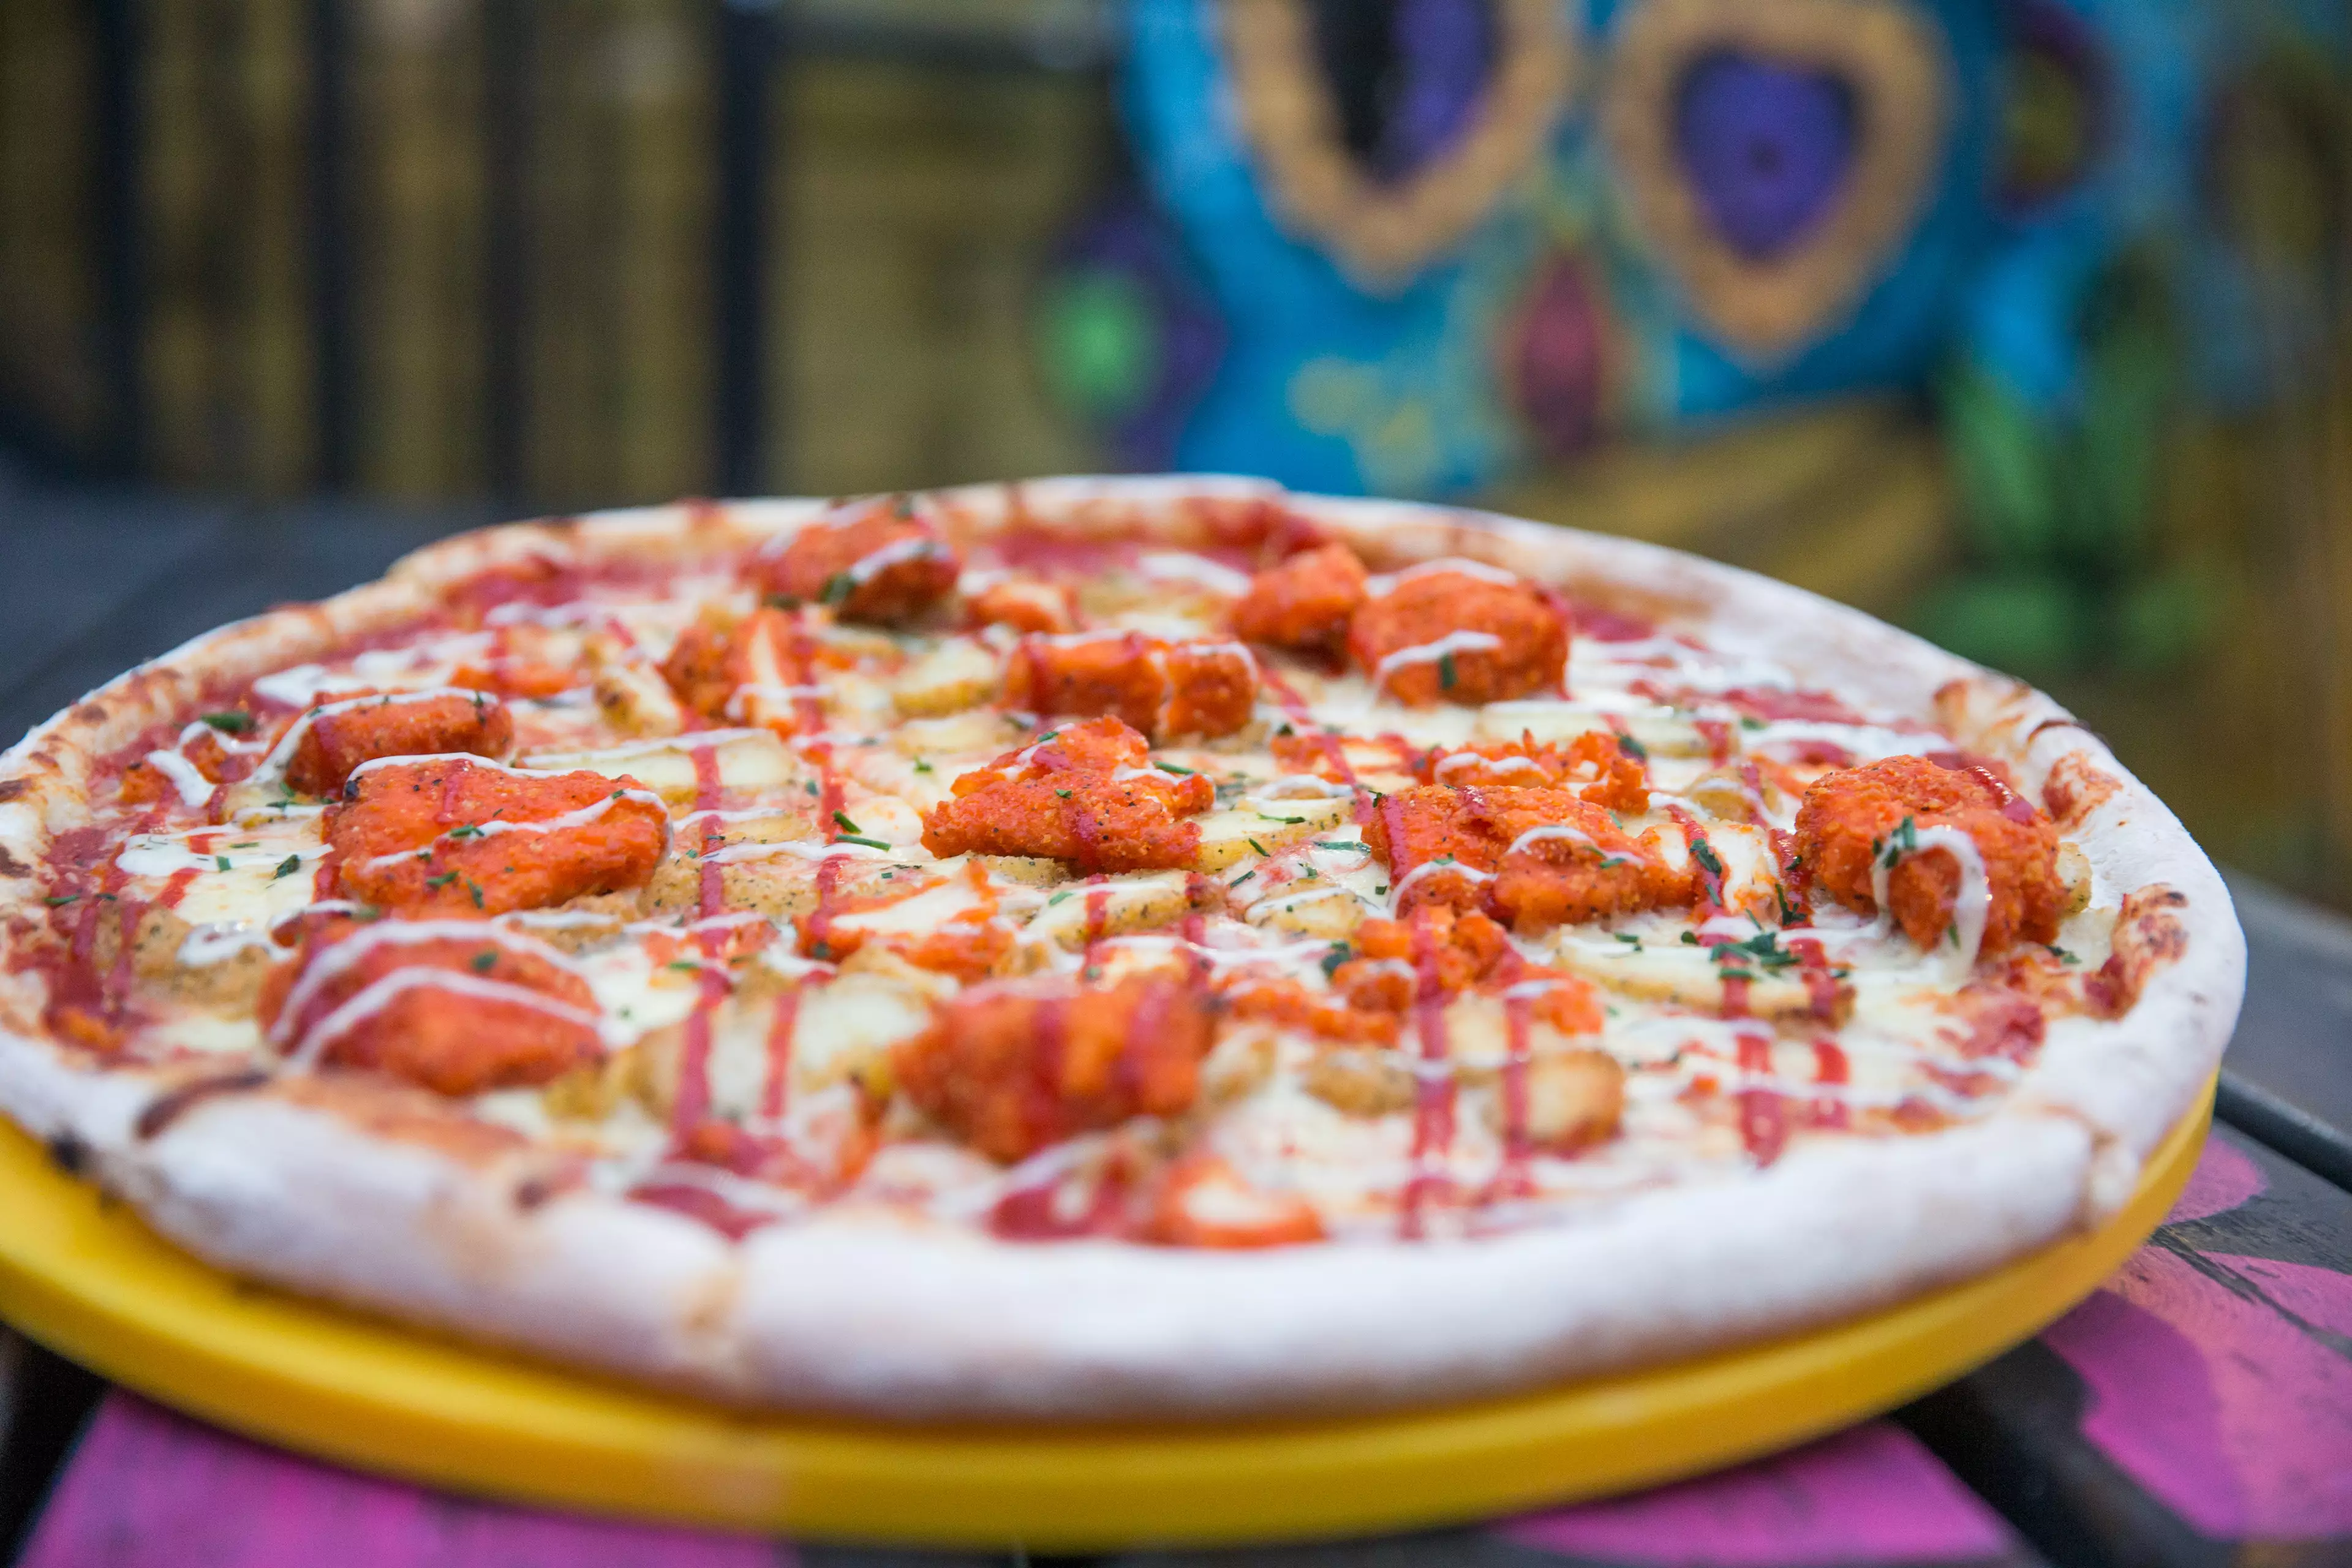 The pizza is drizzled with a sauce made from two of the world's hottest chilli varieties, Naga Viper and Carolina Reaper (